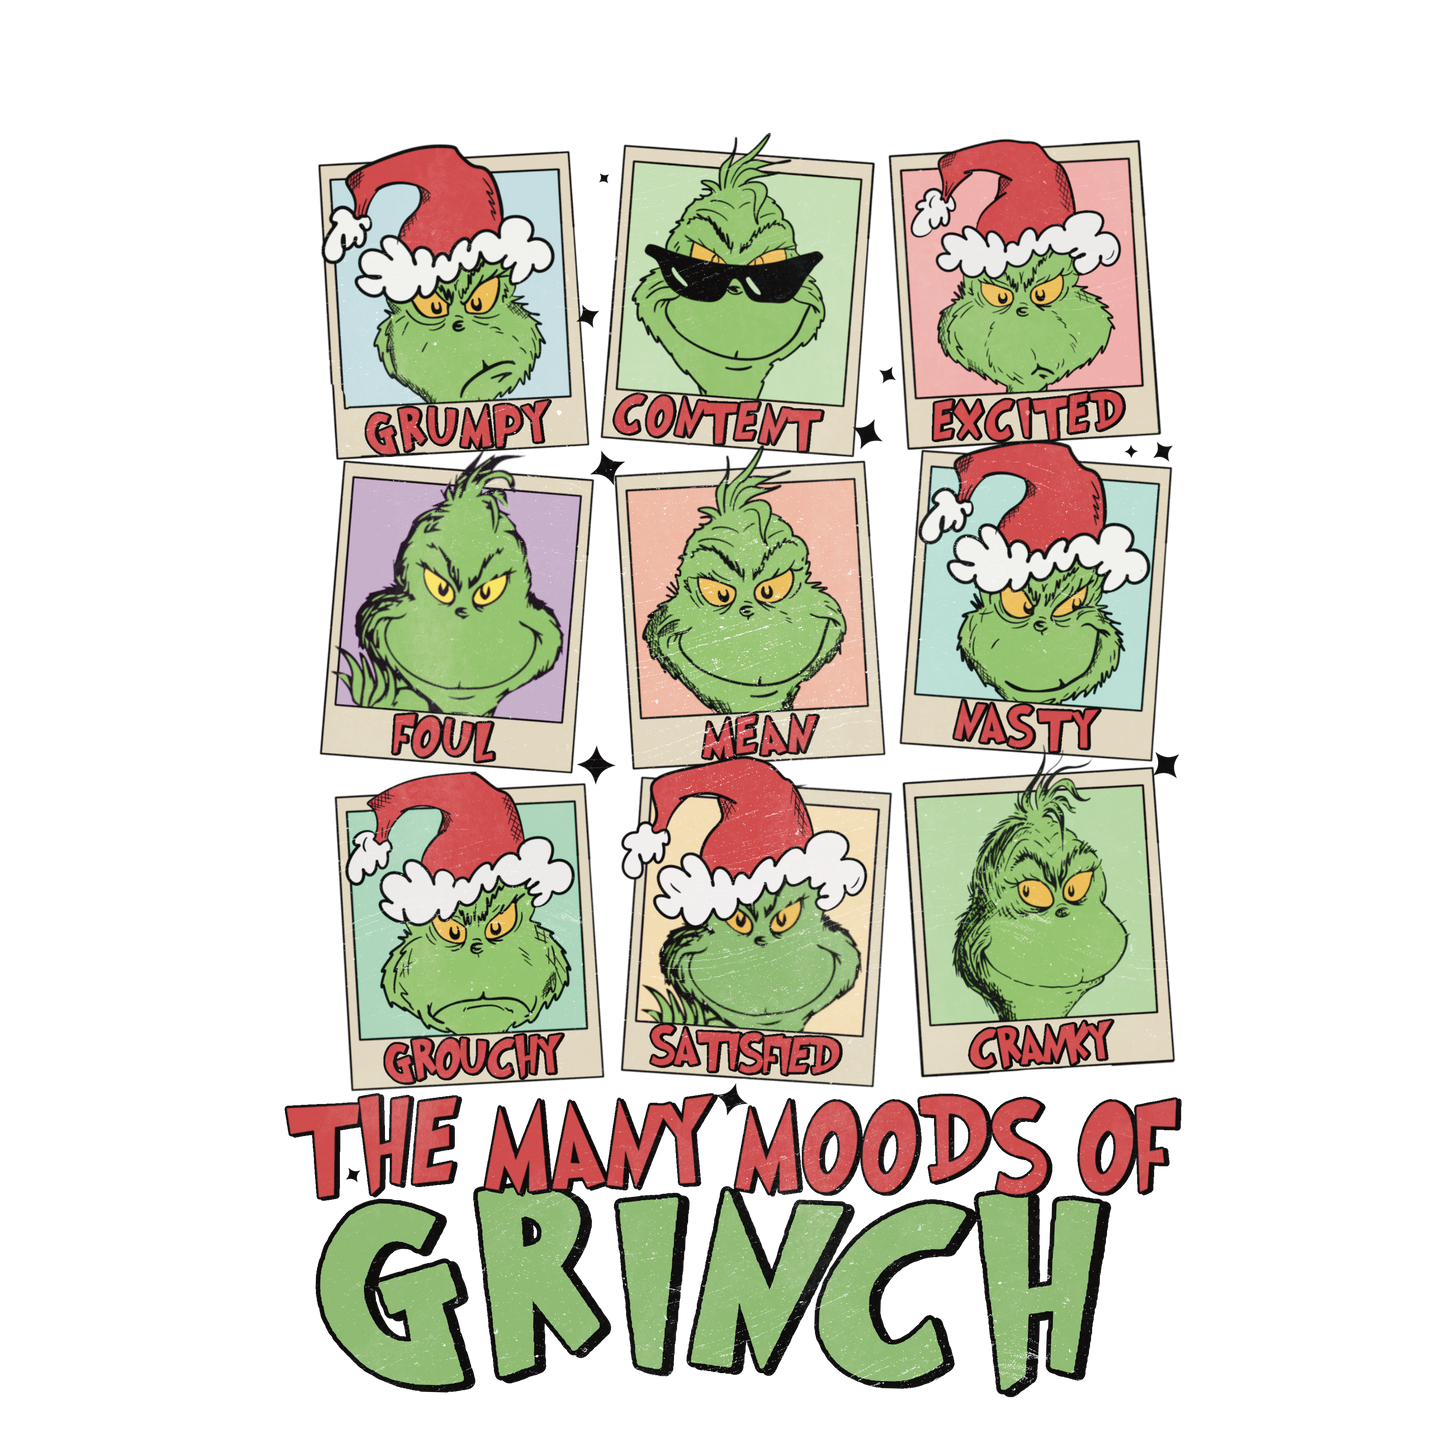 THE MANY MOODS OF GRINCH